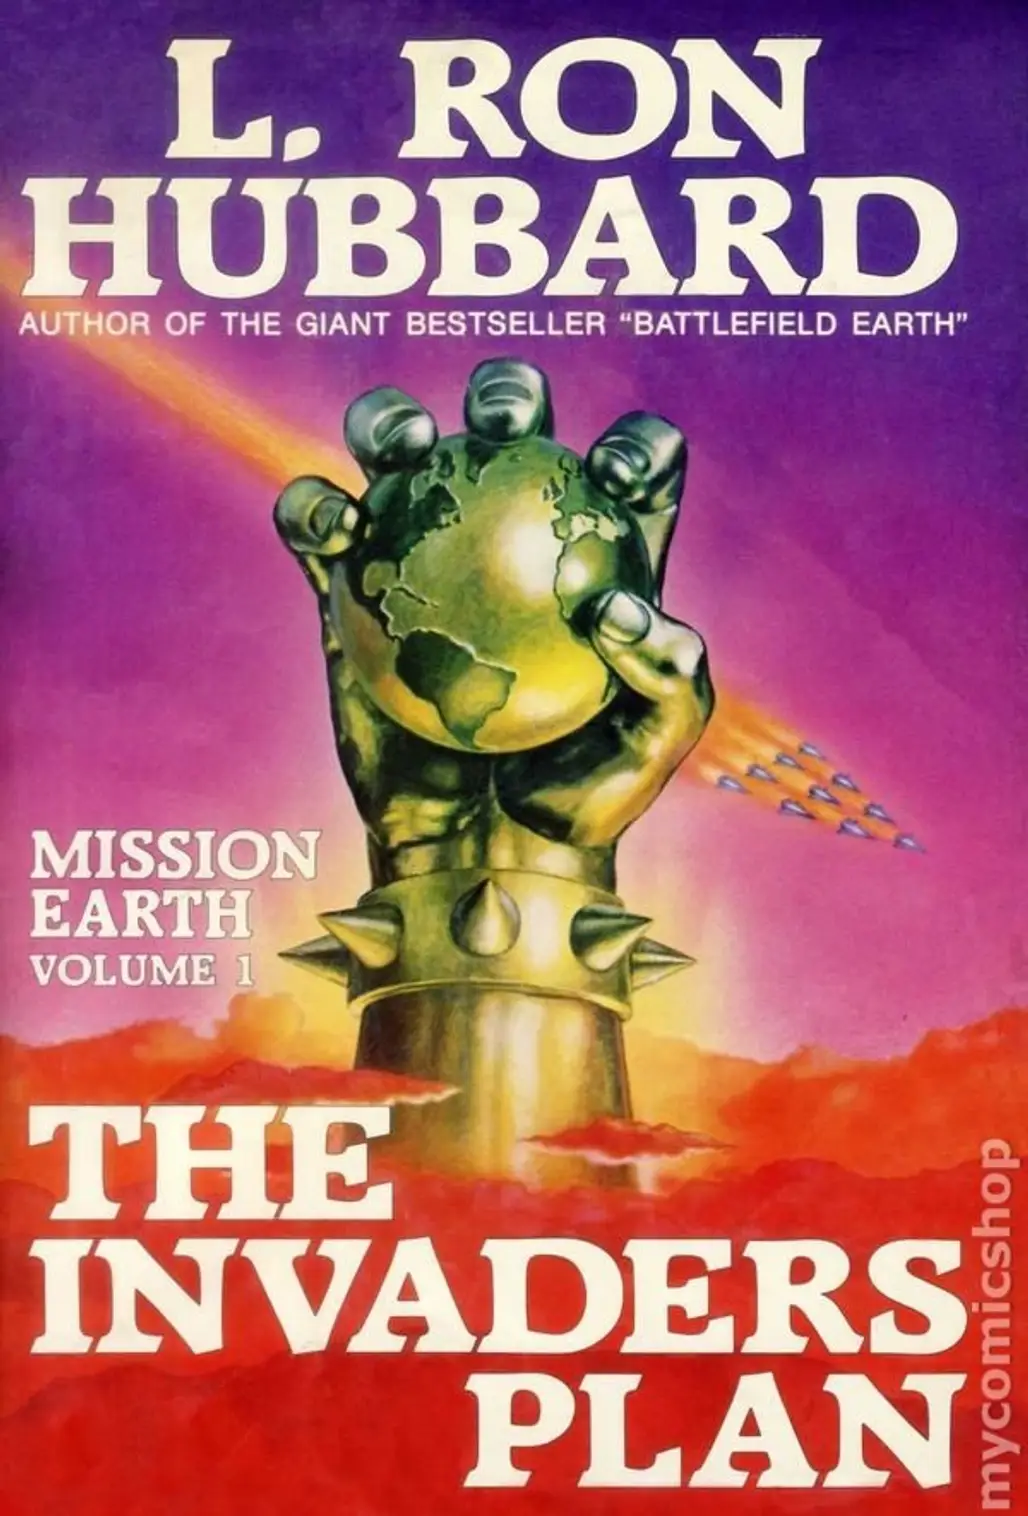 Mission Earth by L. Ron Hubbard